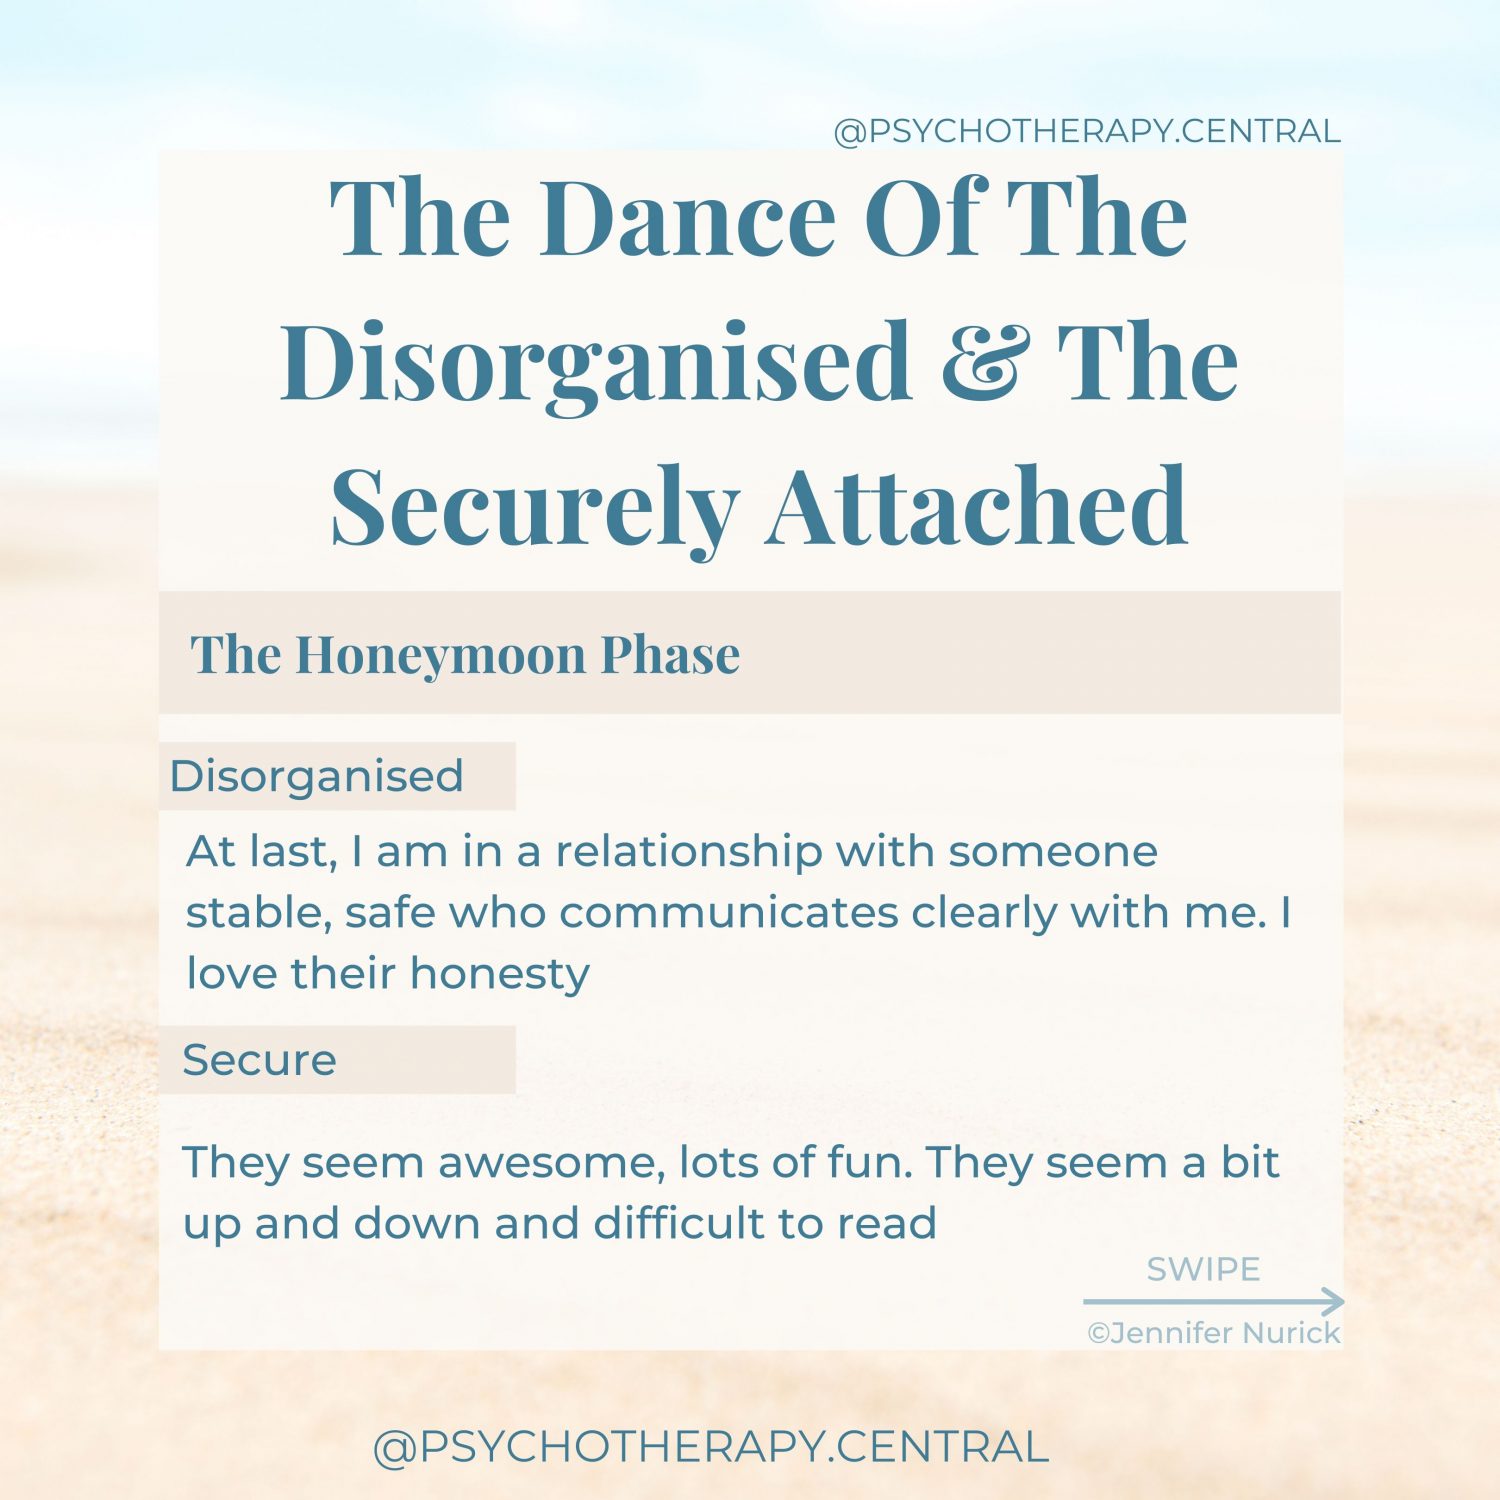 The Dance Of The Disorganised And The Securely Attached HONEYMOON PHASE: Disorganised: “At last, I am in a relationship with someone stable, safe, and communicates clearly with me. I love their honesty.” Secure: “They seems awesome, lots of fun. They seem a bit up and down, and difficult to read.”